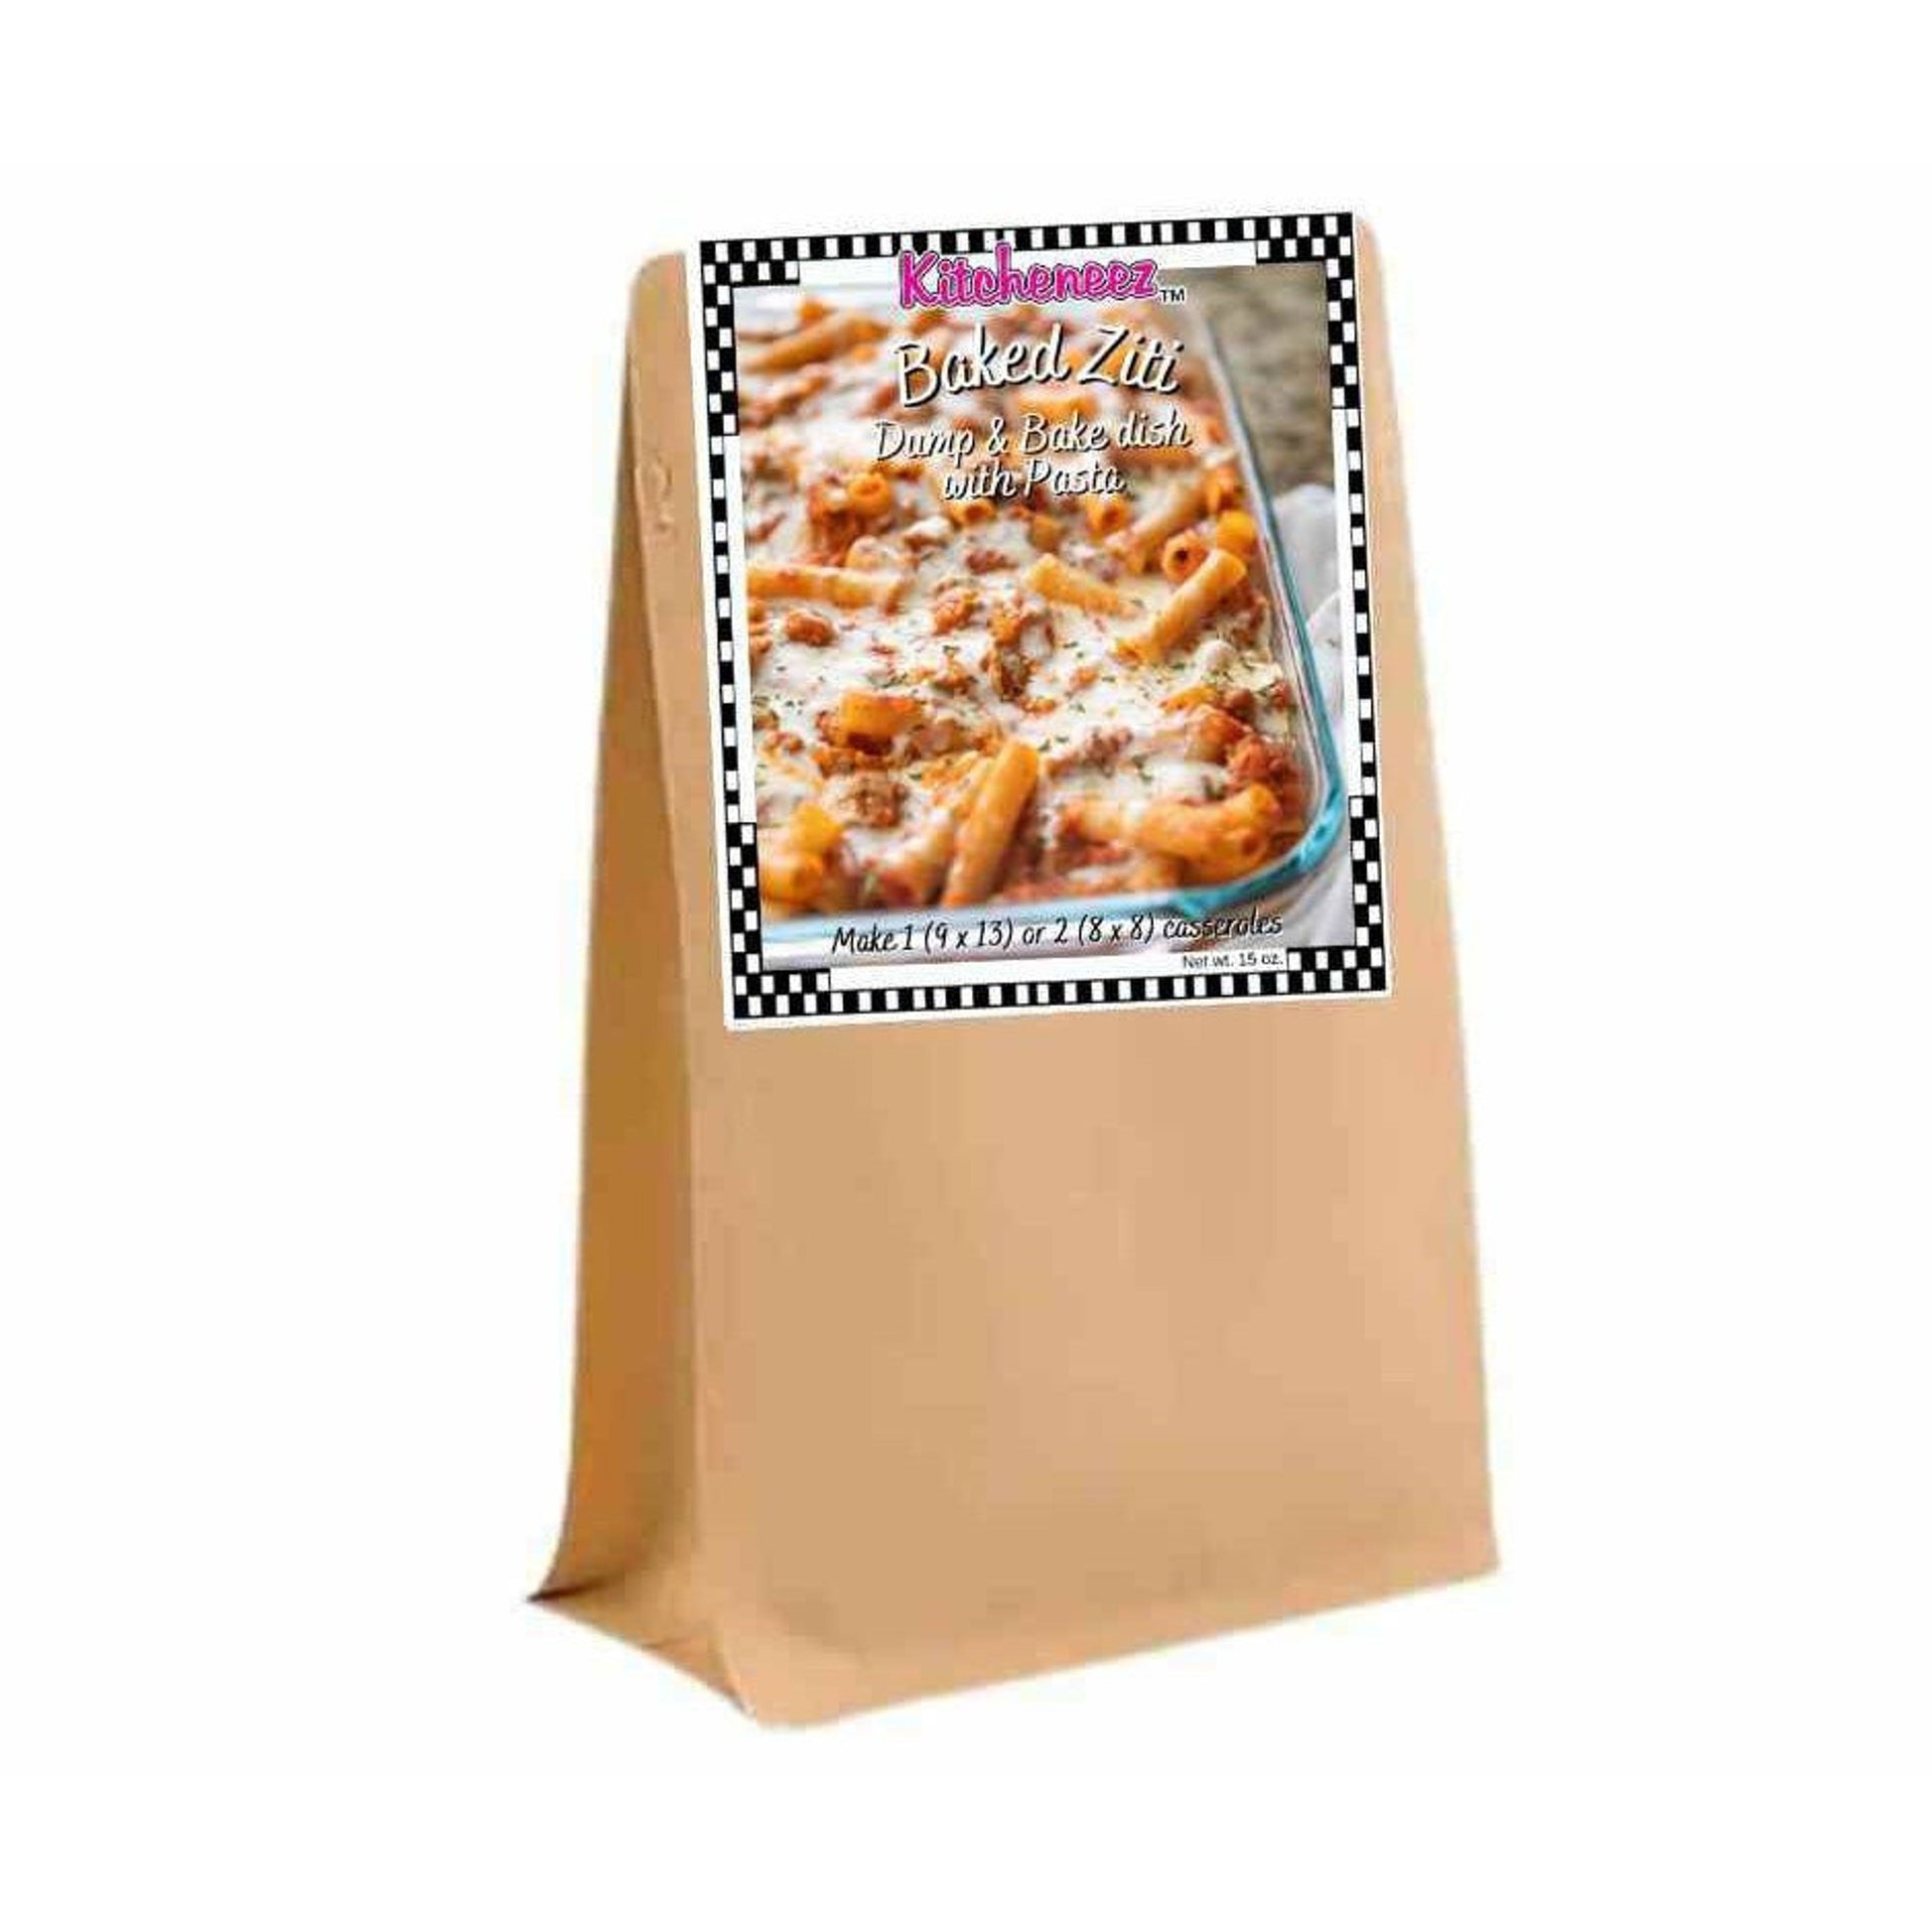 Baked Ziti Dump 'n Bake Meal with pasta included - Kitcheneez Mixes & More!